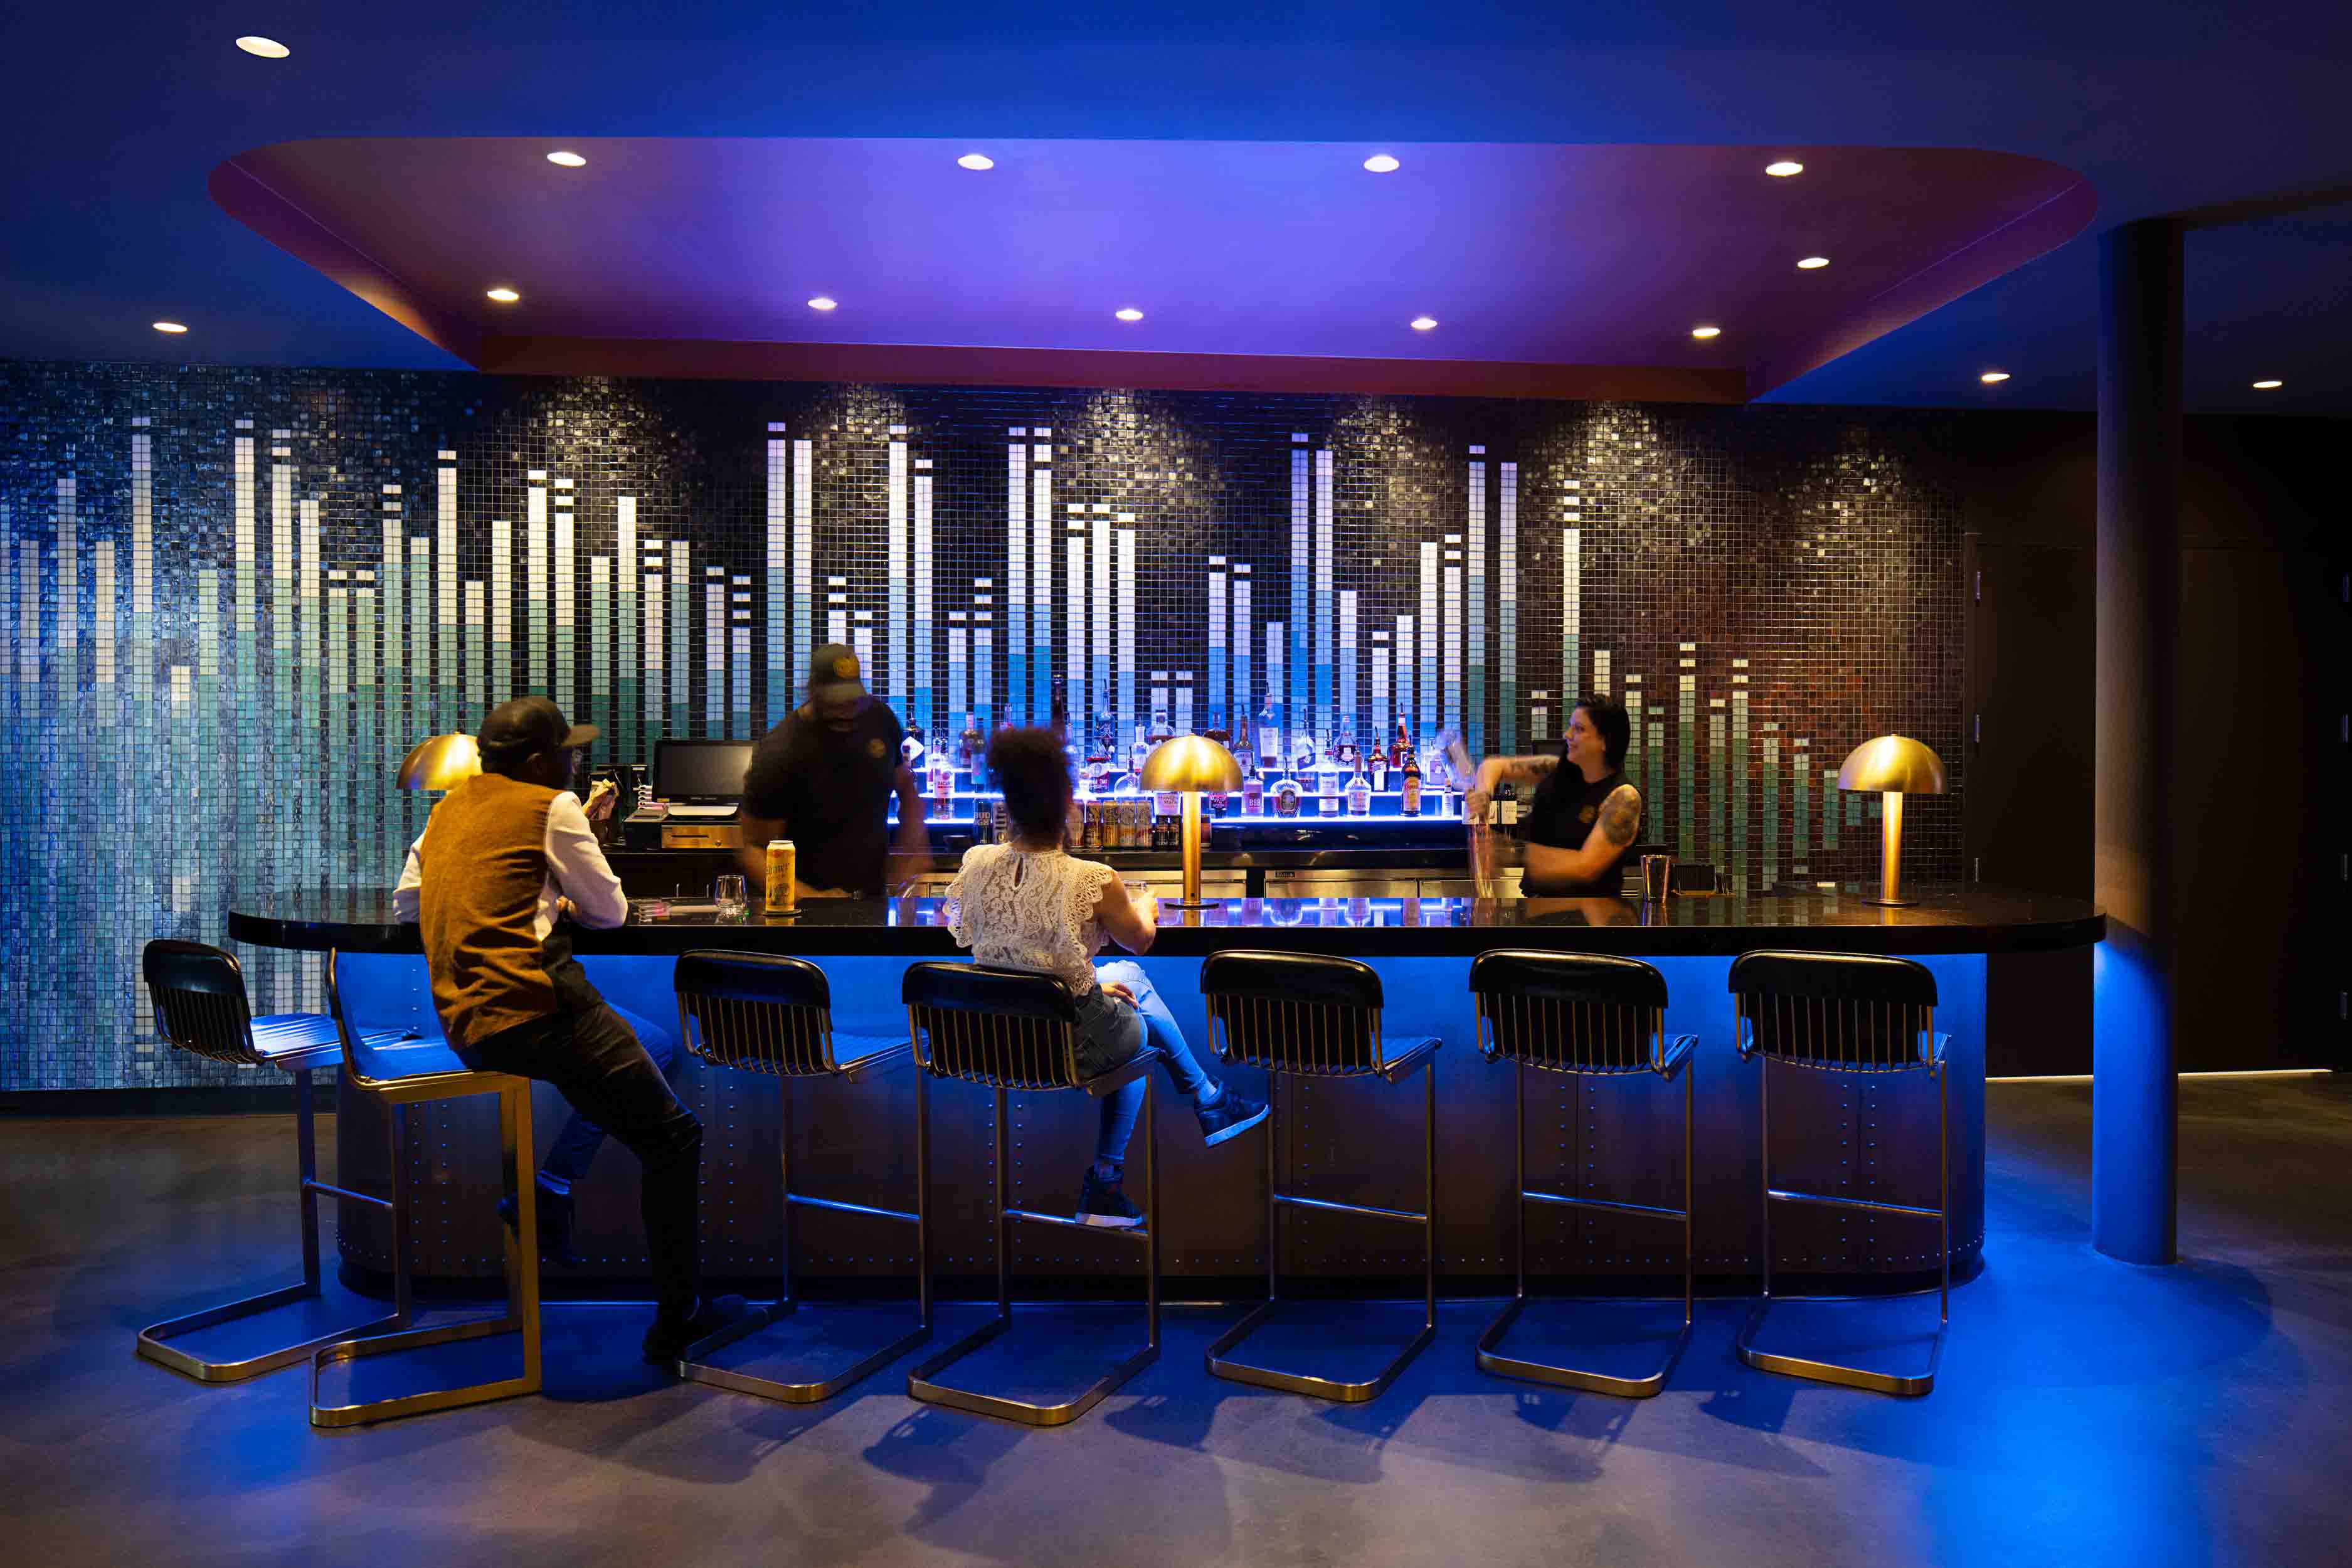 The Echo Lounge bar custom designed with a graphic mural